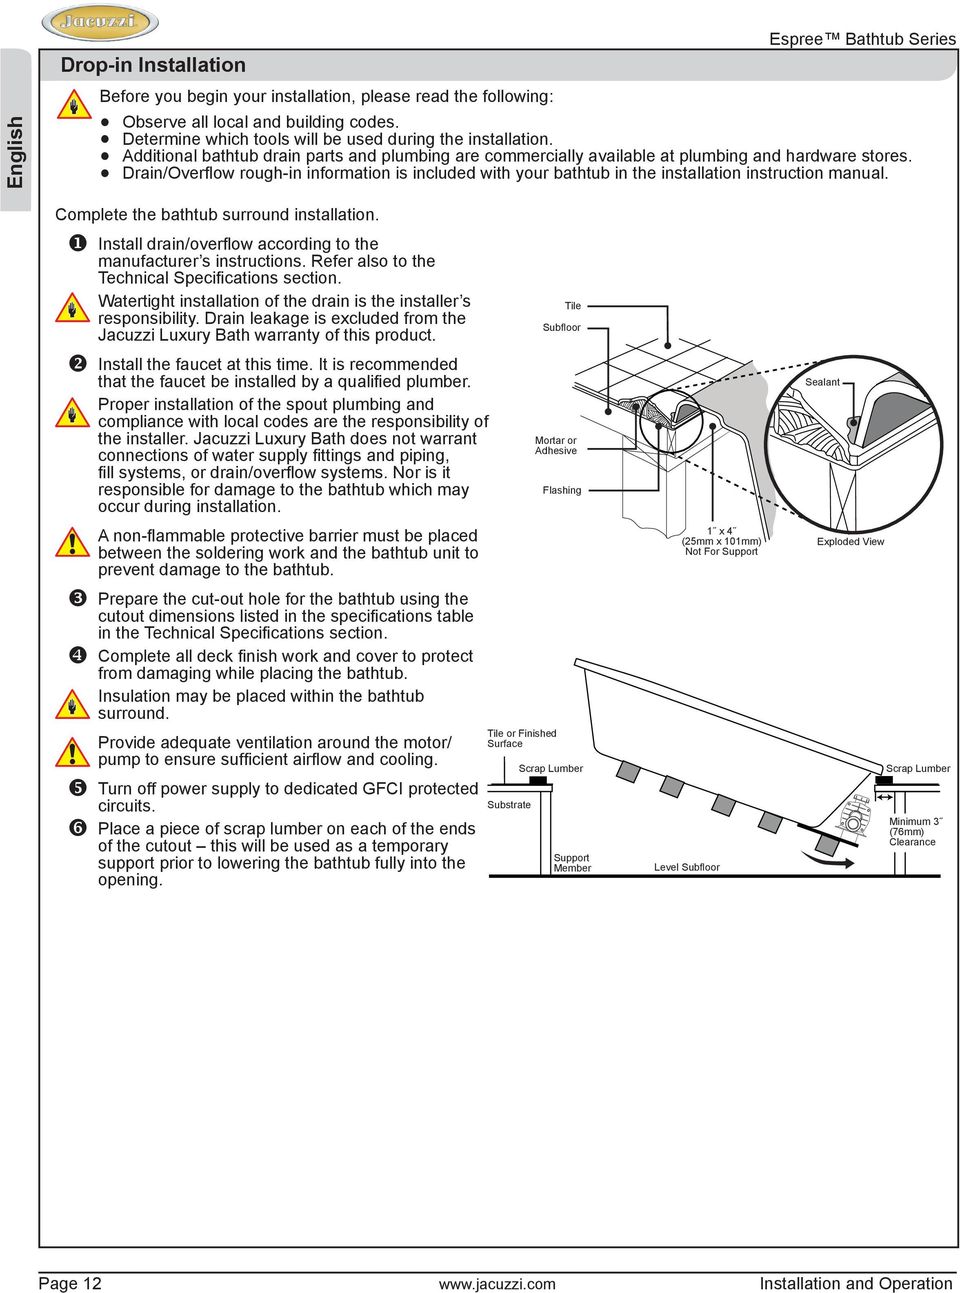 Drain/Overflow rough-in information is included with your bathtub in the installation instruction manual. Complete the bathtub surround installation.